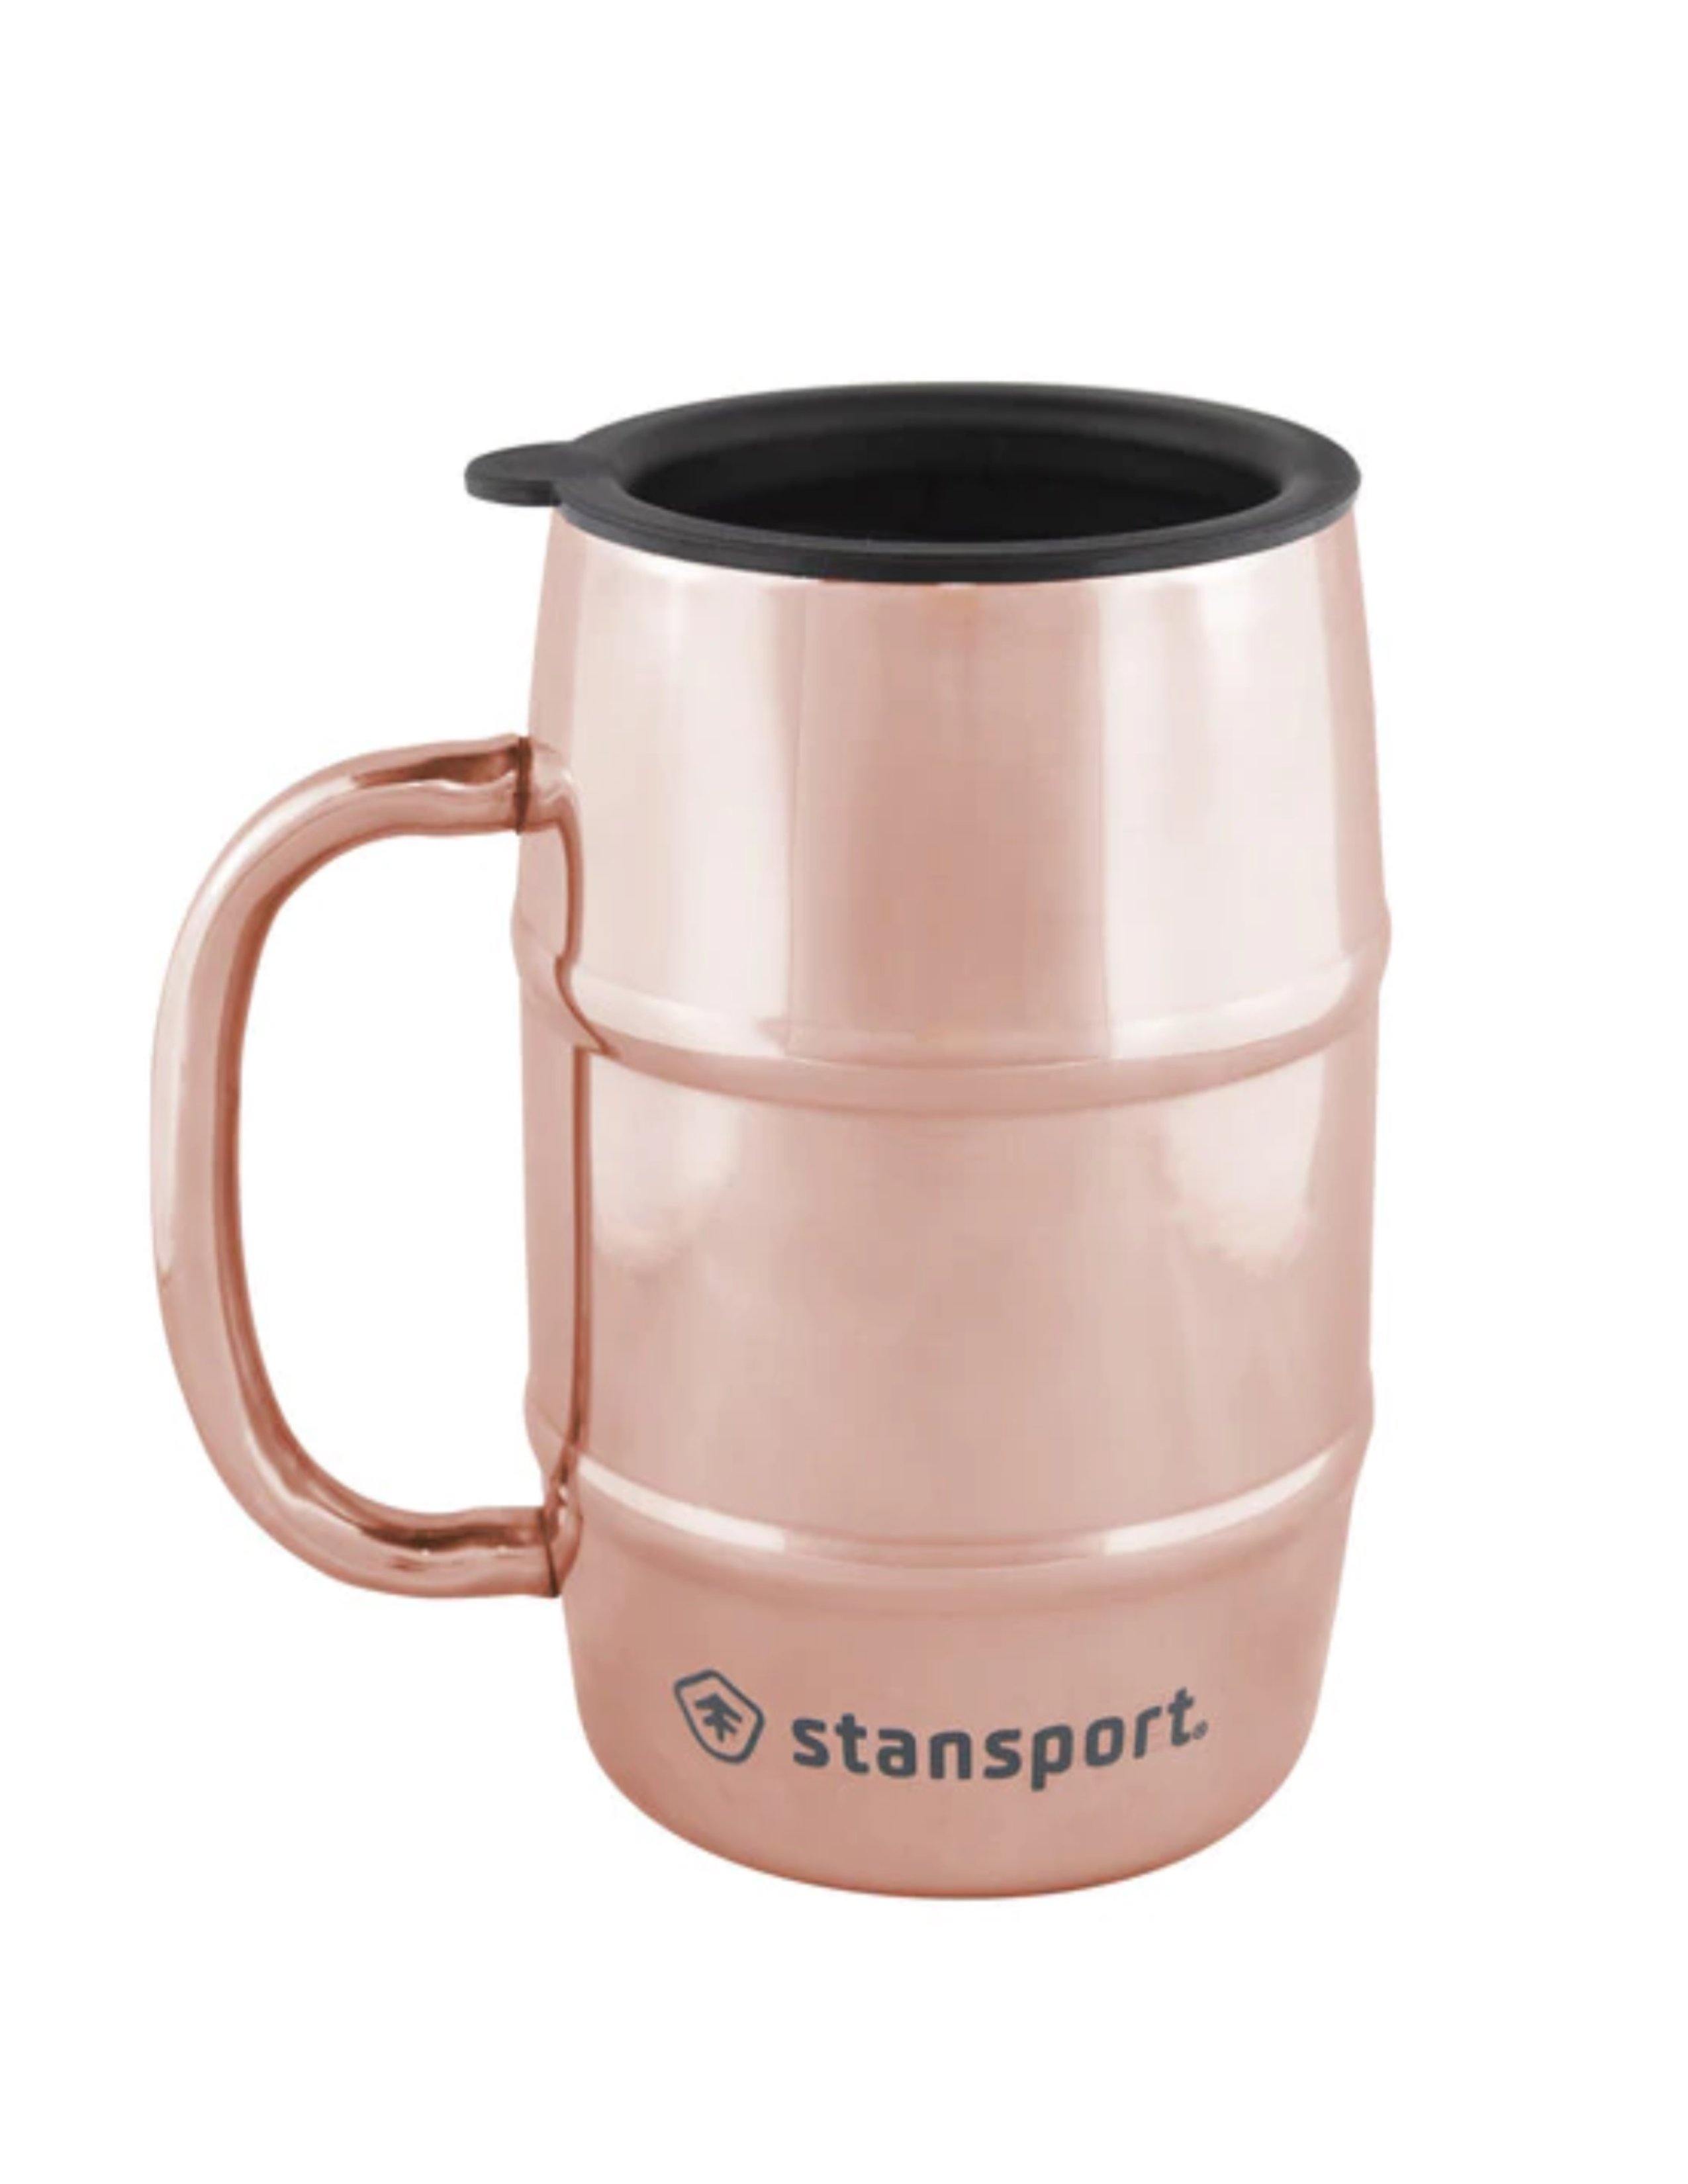 Stansport 16 OZ. Double Wall Camp Mug - Leapfrog Outdoor Sports and Apparel